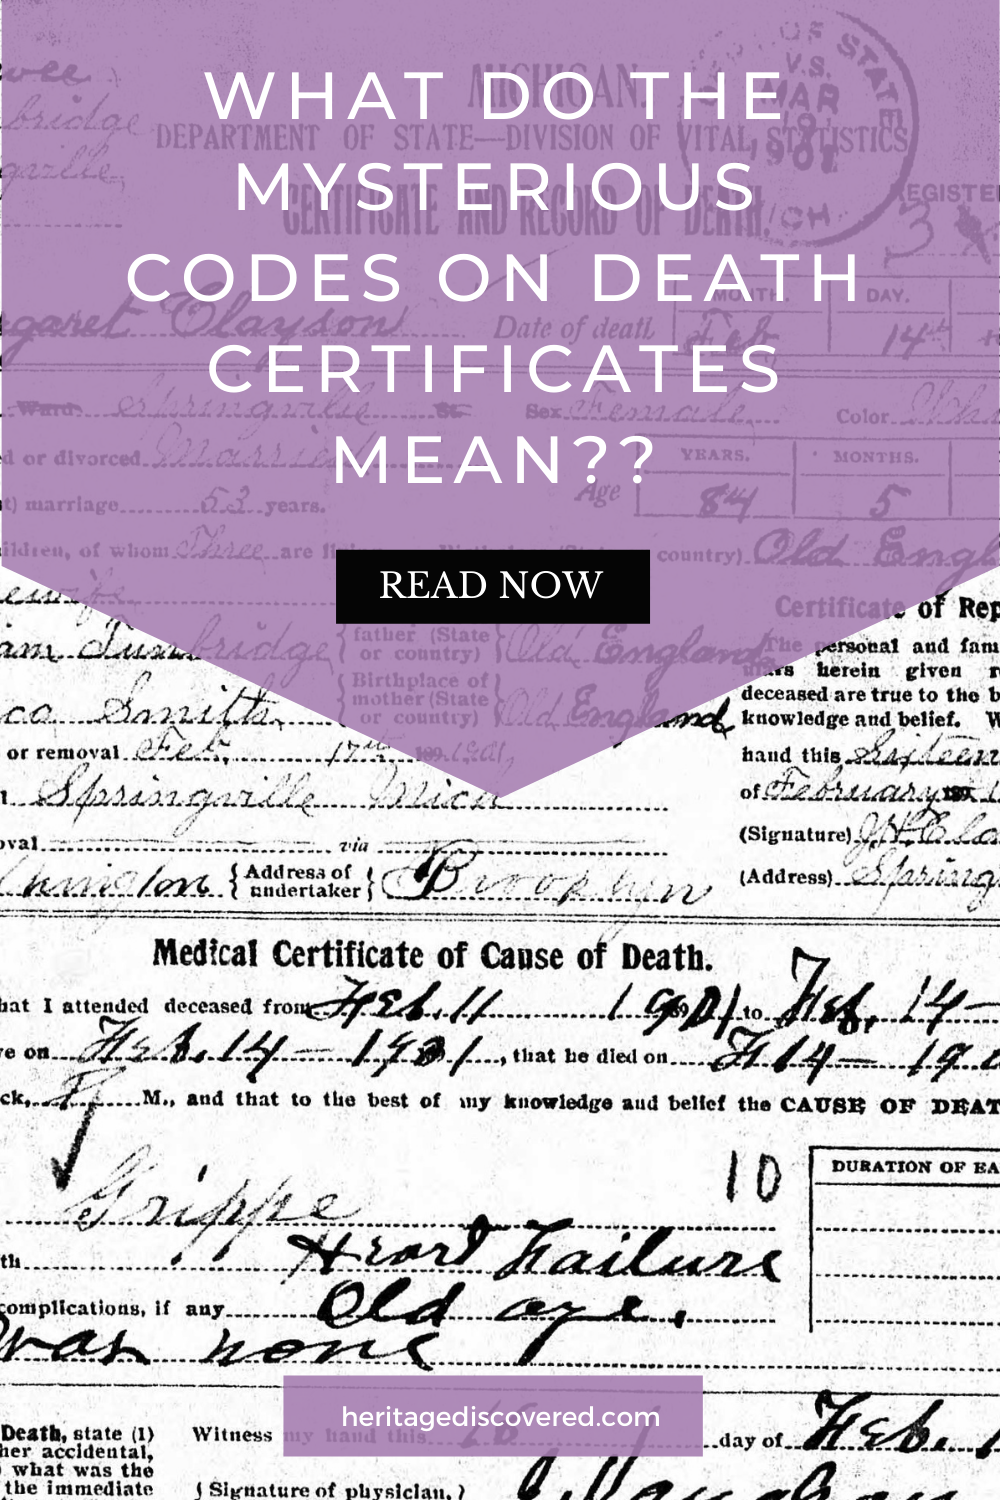 how-to-decode-death-certificate-codes-1